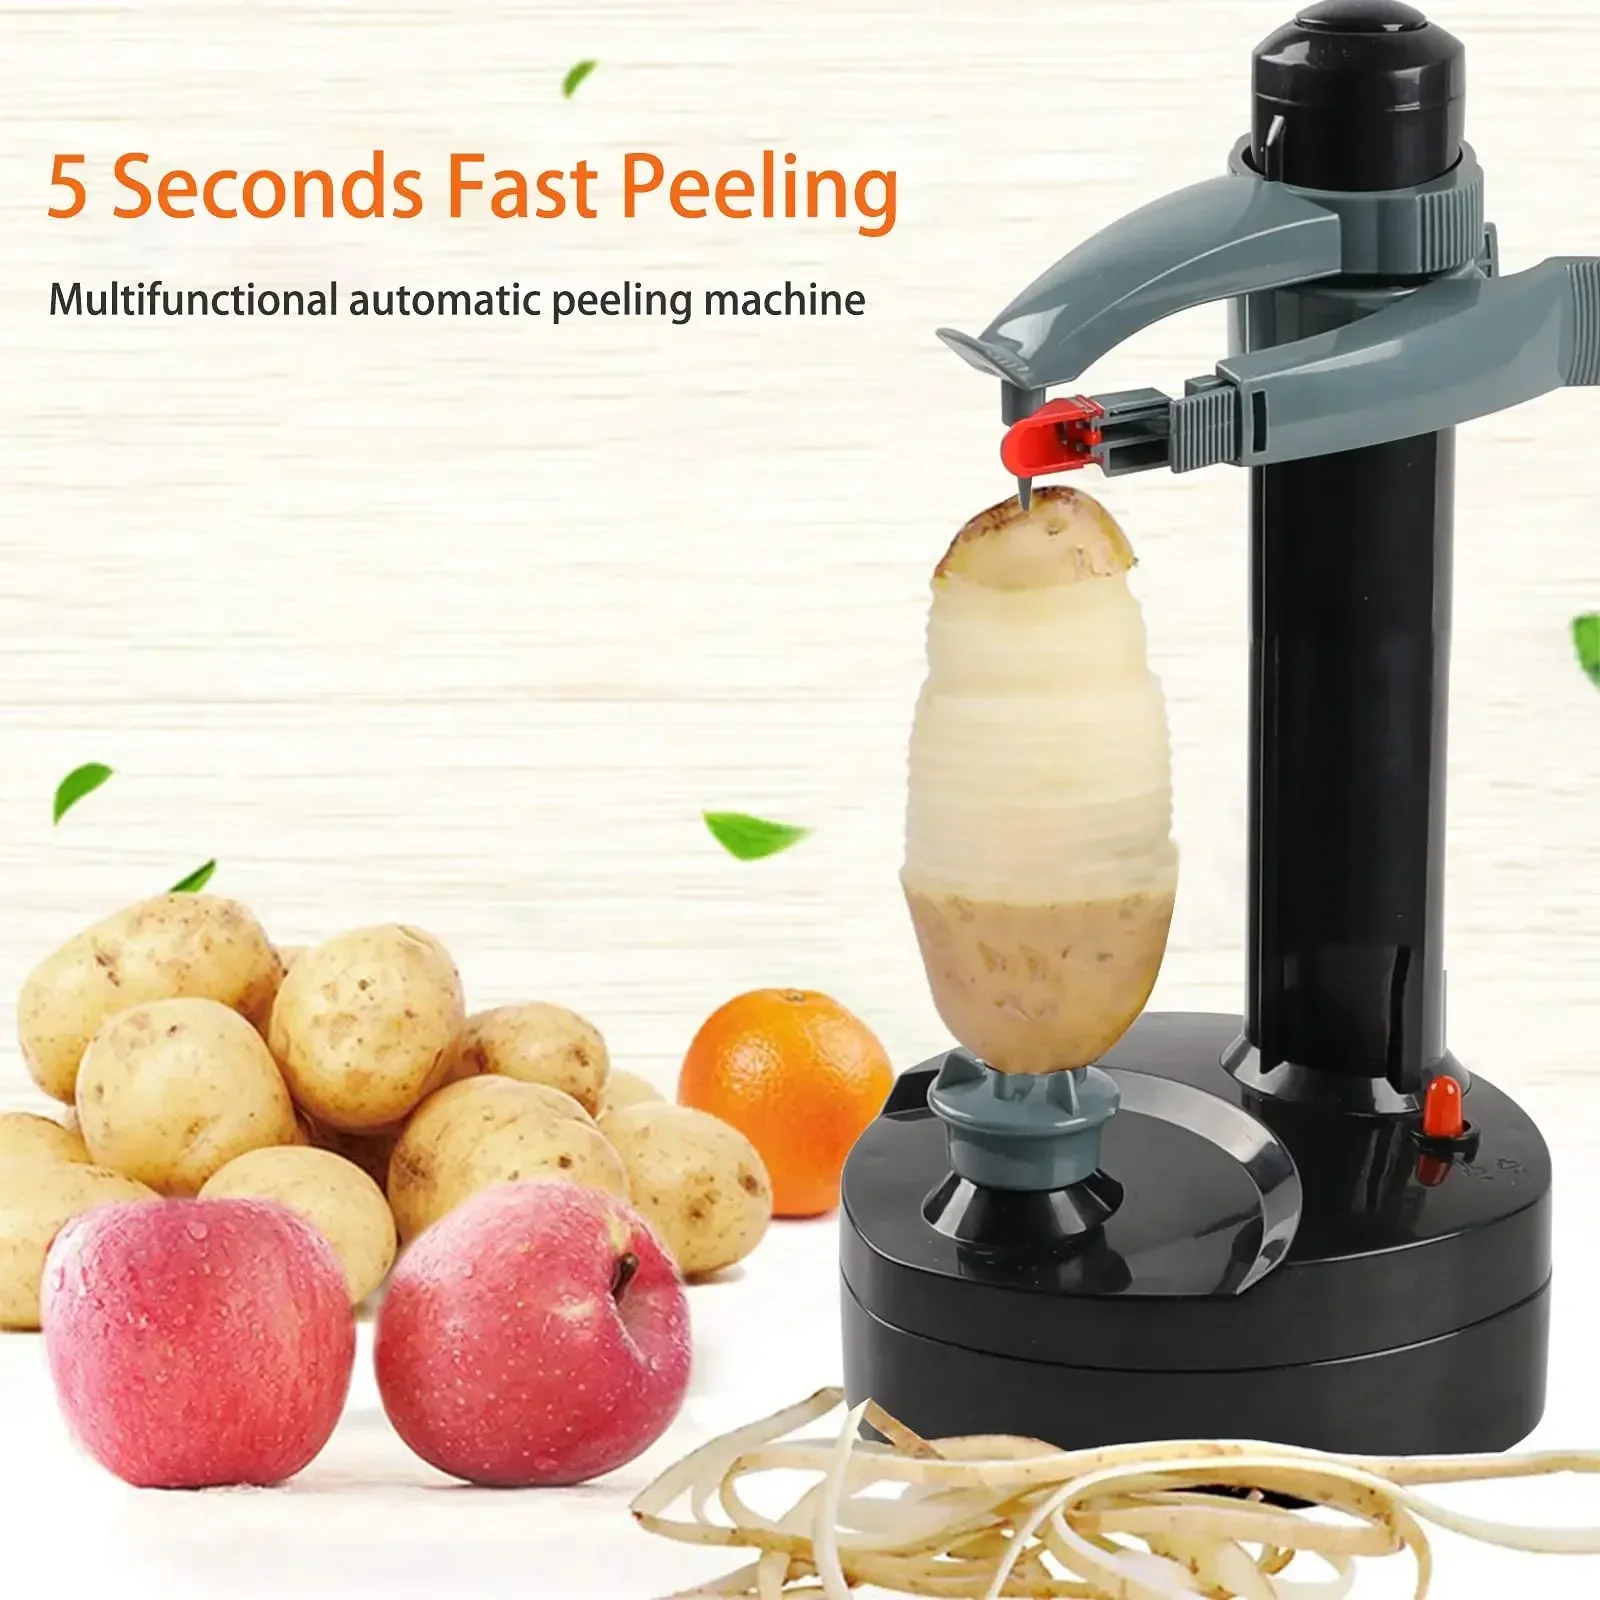 https://ae01.alicdn.com/kf/Sa6c27f5a4a2e41d5a78c8b845905972fM/Electric-Potato-Peeler-with-1-Replacement-Blades-Stainless-Steel-Automatic-Rotating-Fruits-Fruit-Peeler-Apple-Paring.jpg